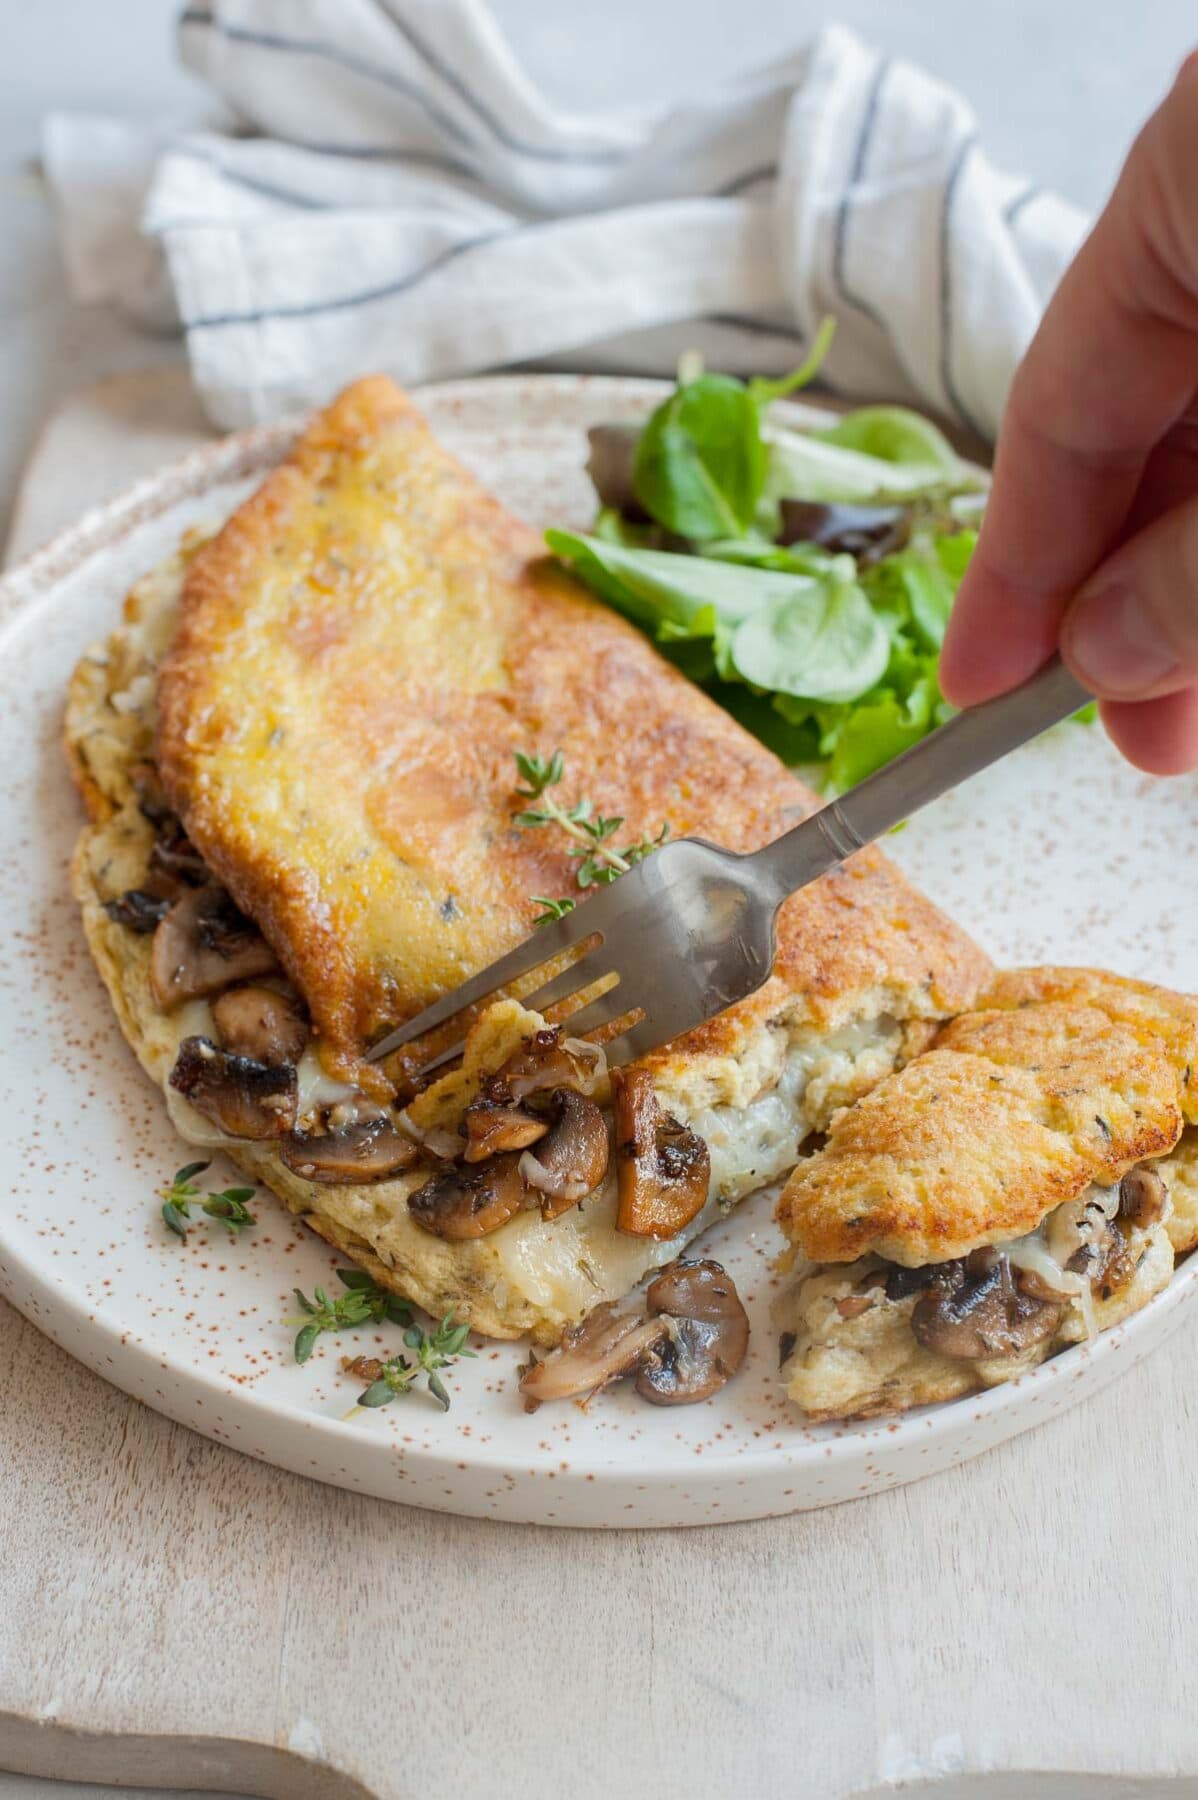 Fluffy omelet filled with mushrooms and cheese on a white plate is being cut with a fork.